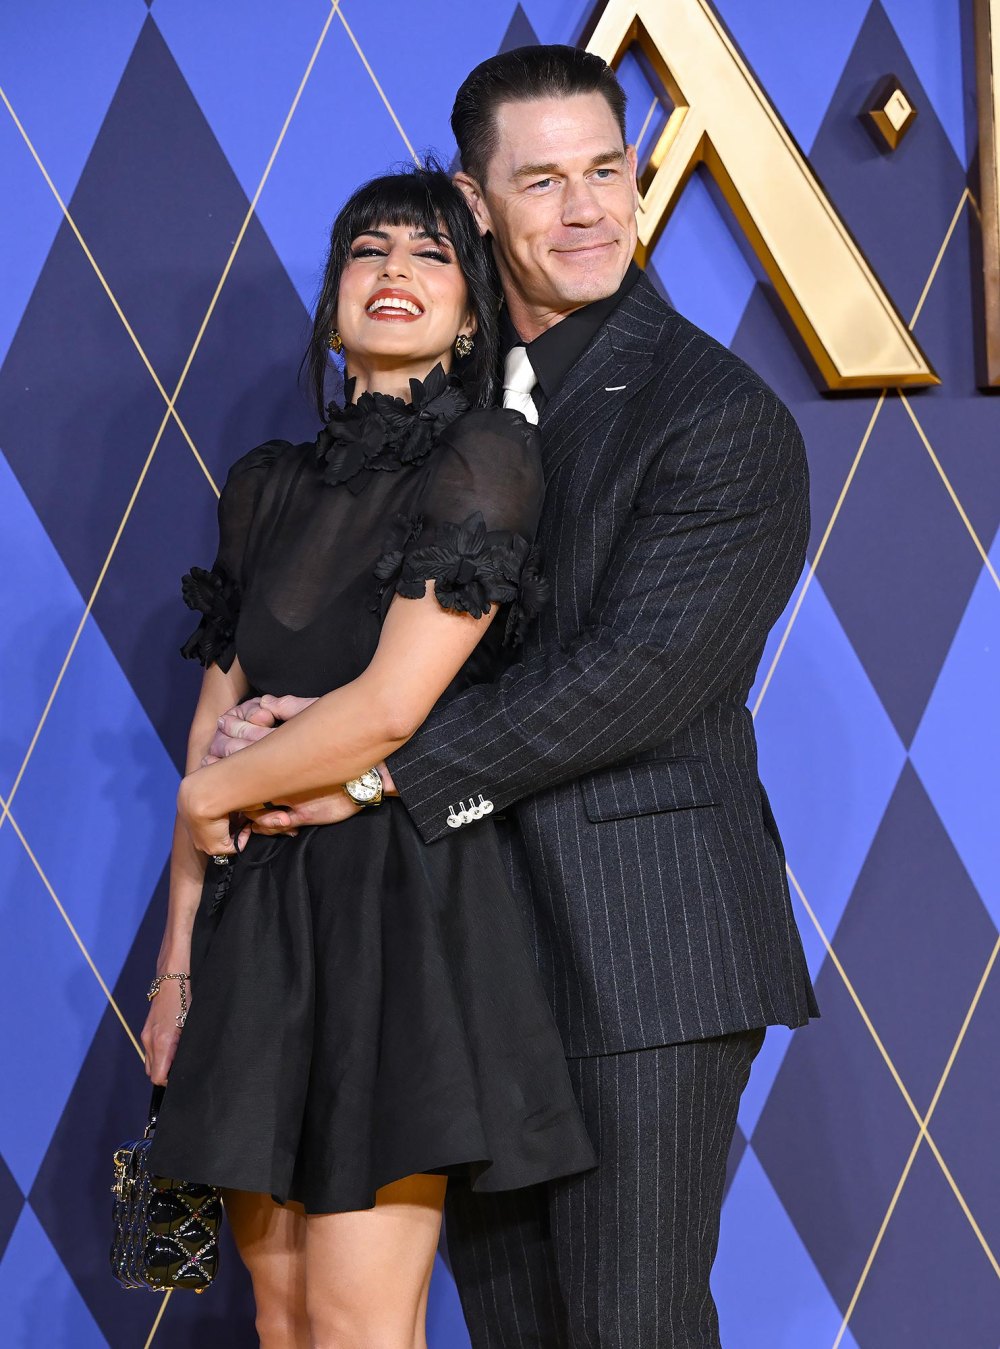 John Cena and Wife Shay Shariatzadeh Have a Rare Red Carpet Date Night at 'Argylle' Premiere